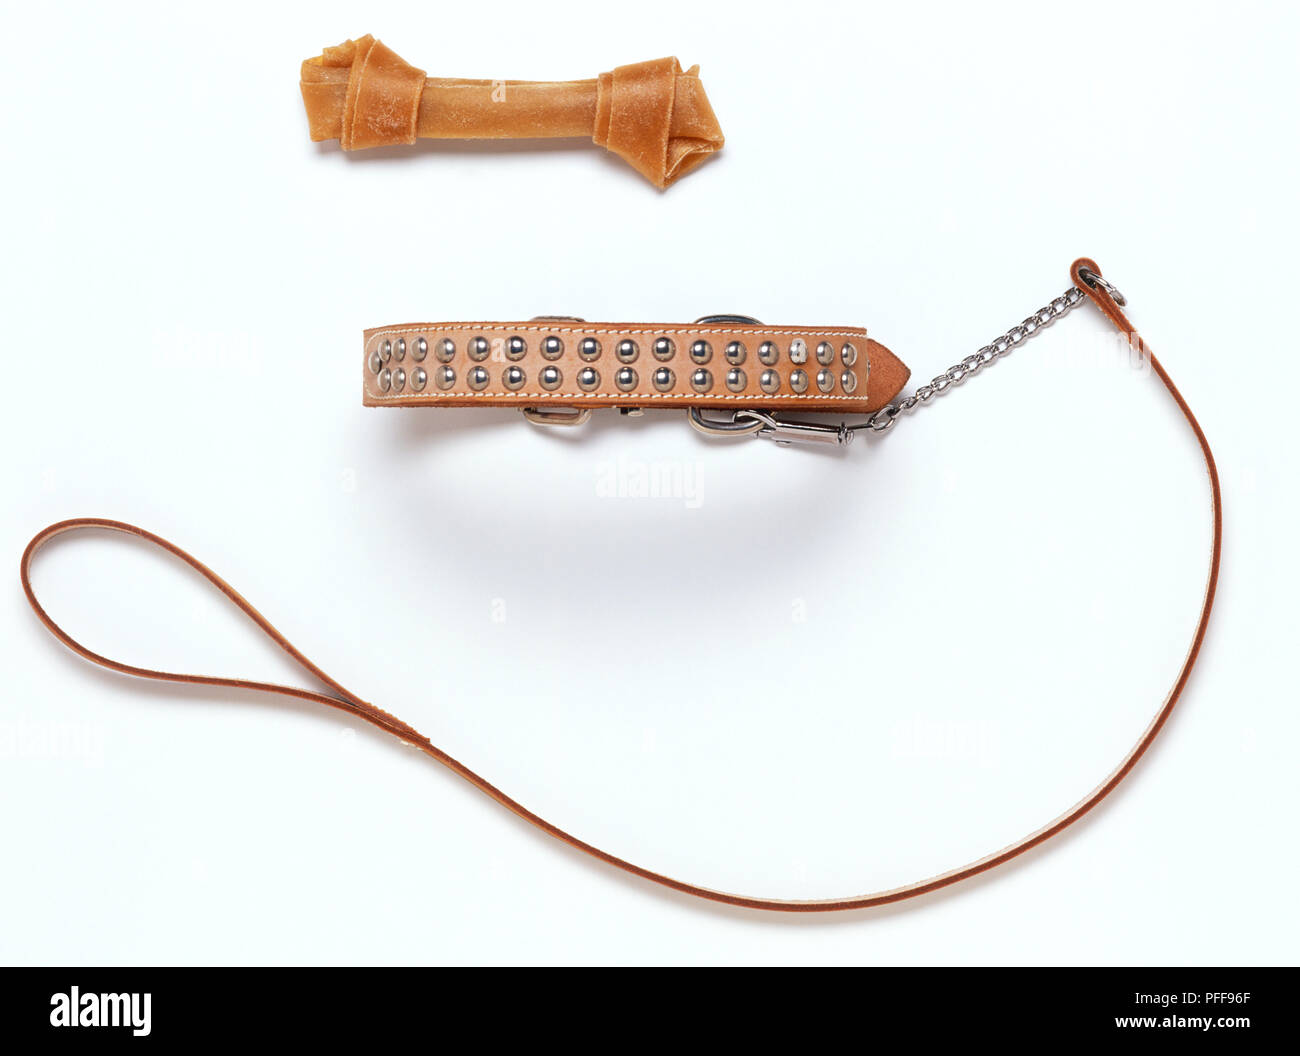 A dog's toy bone and a studded collar with leash Stock Photo